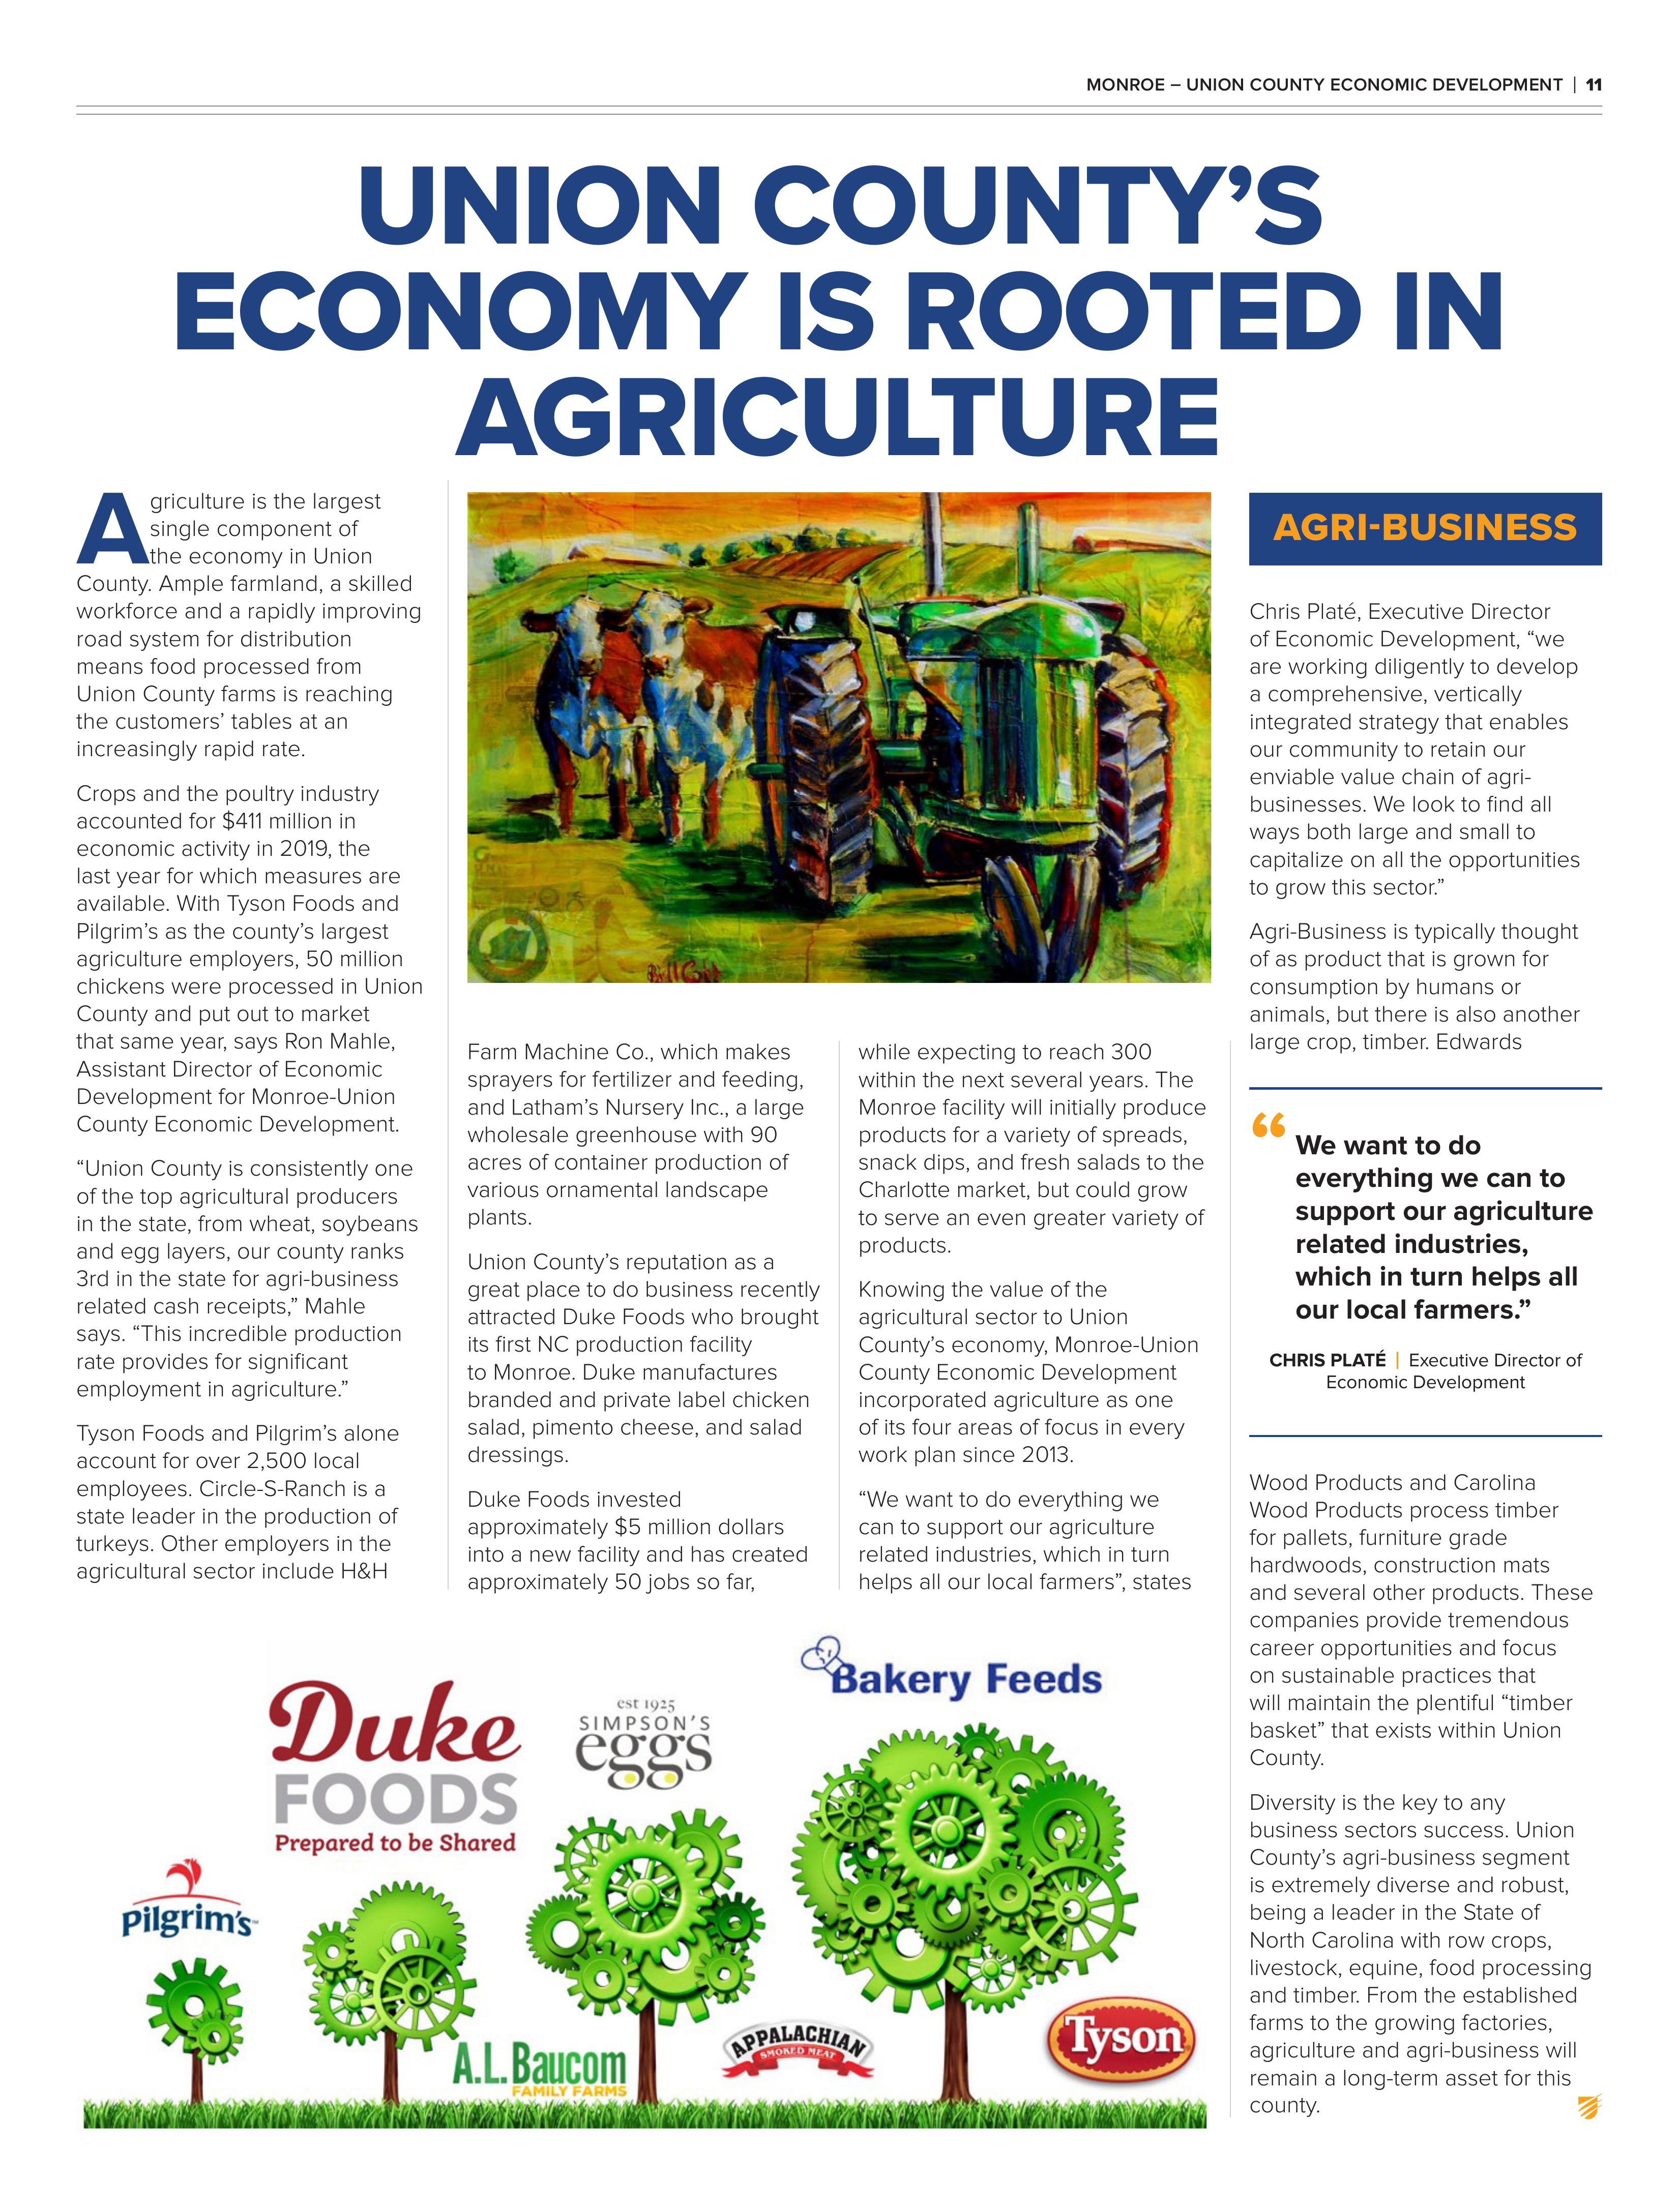 Union County Economy Rooted in Agriculture